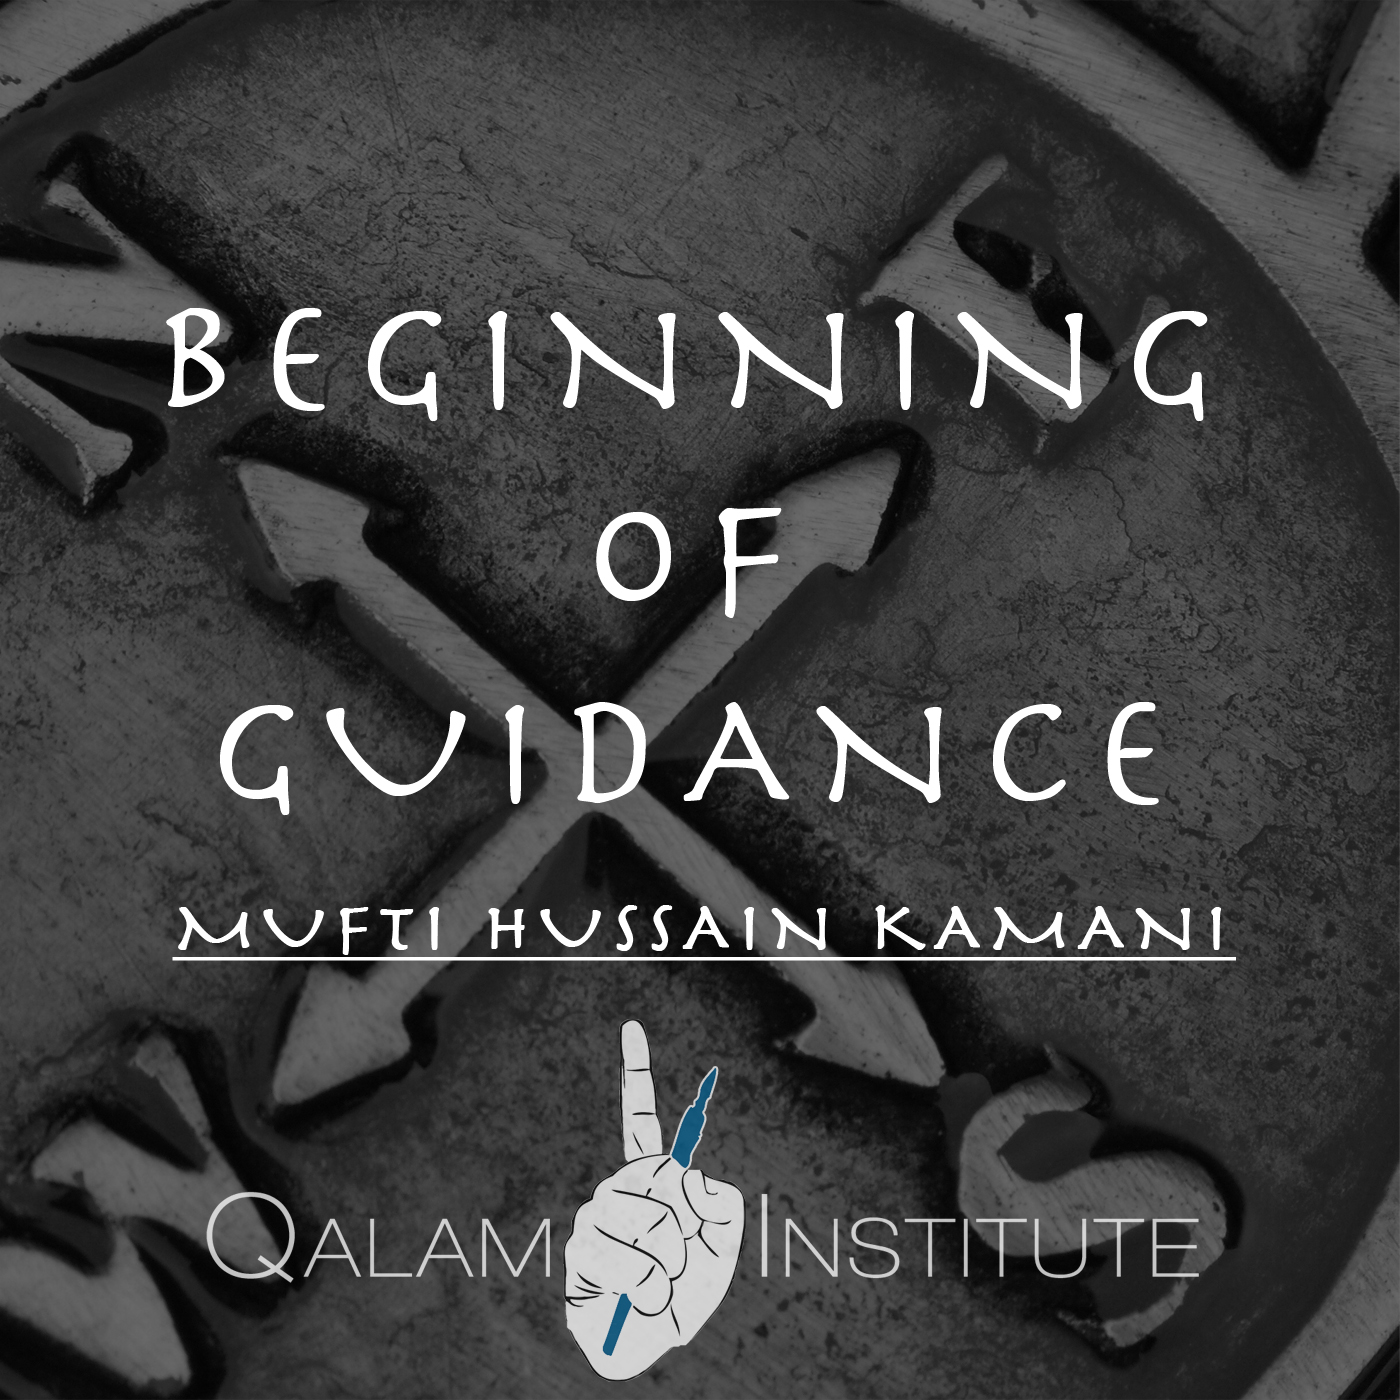 The Beginning of Guidance: EP28 – The Etiquette of The Acquaintances